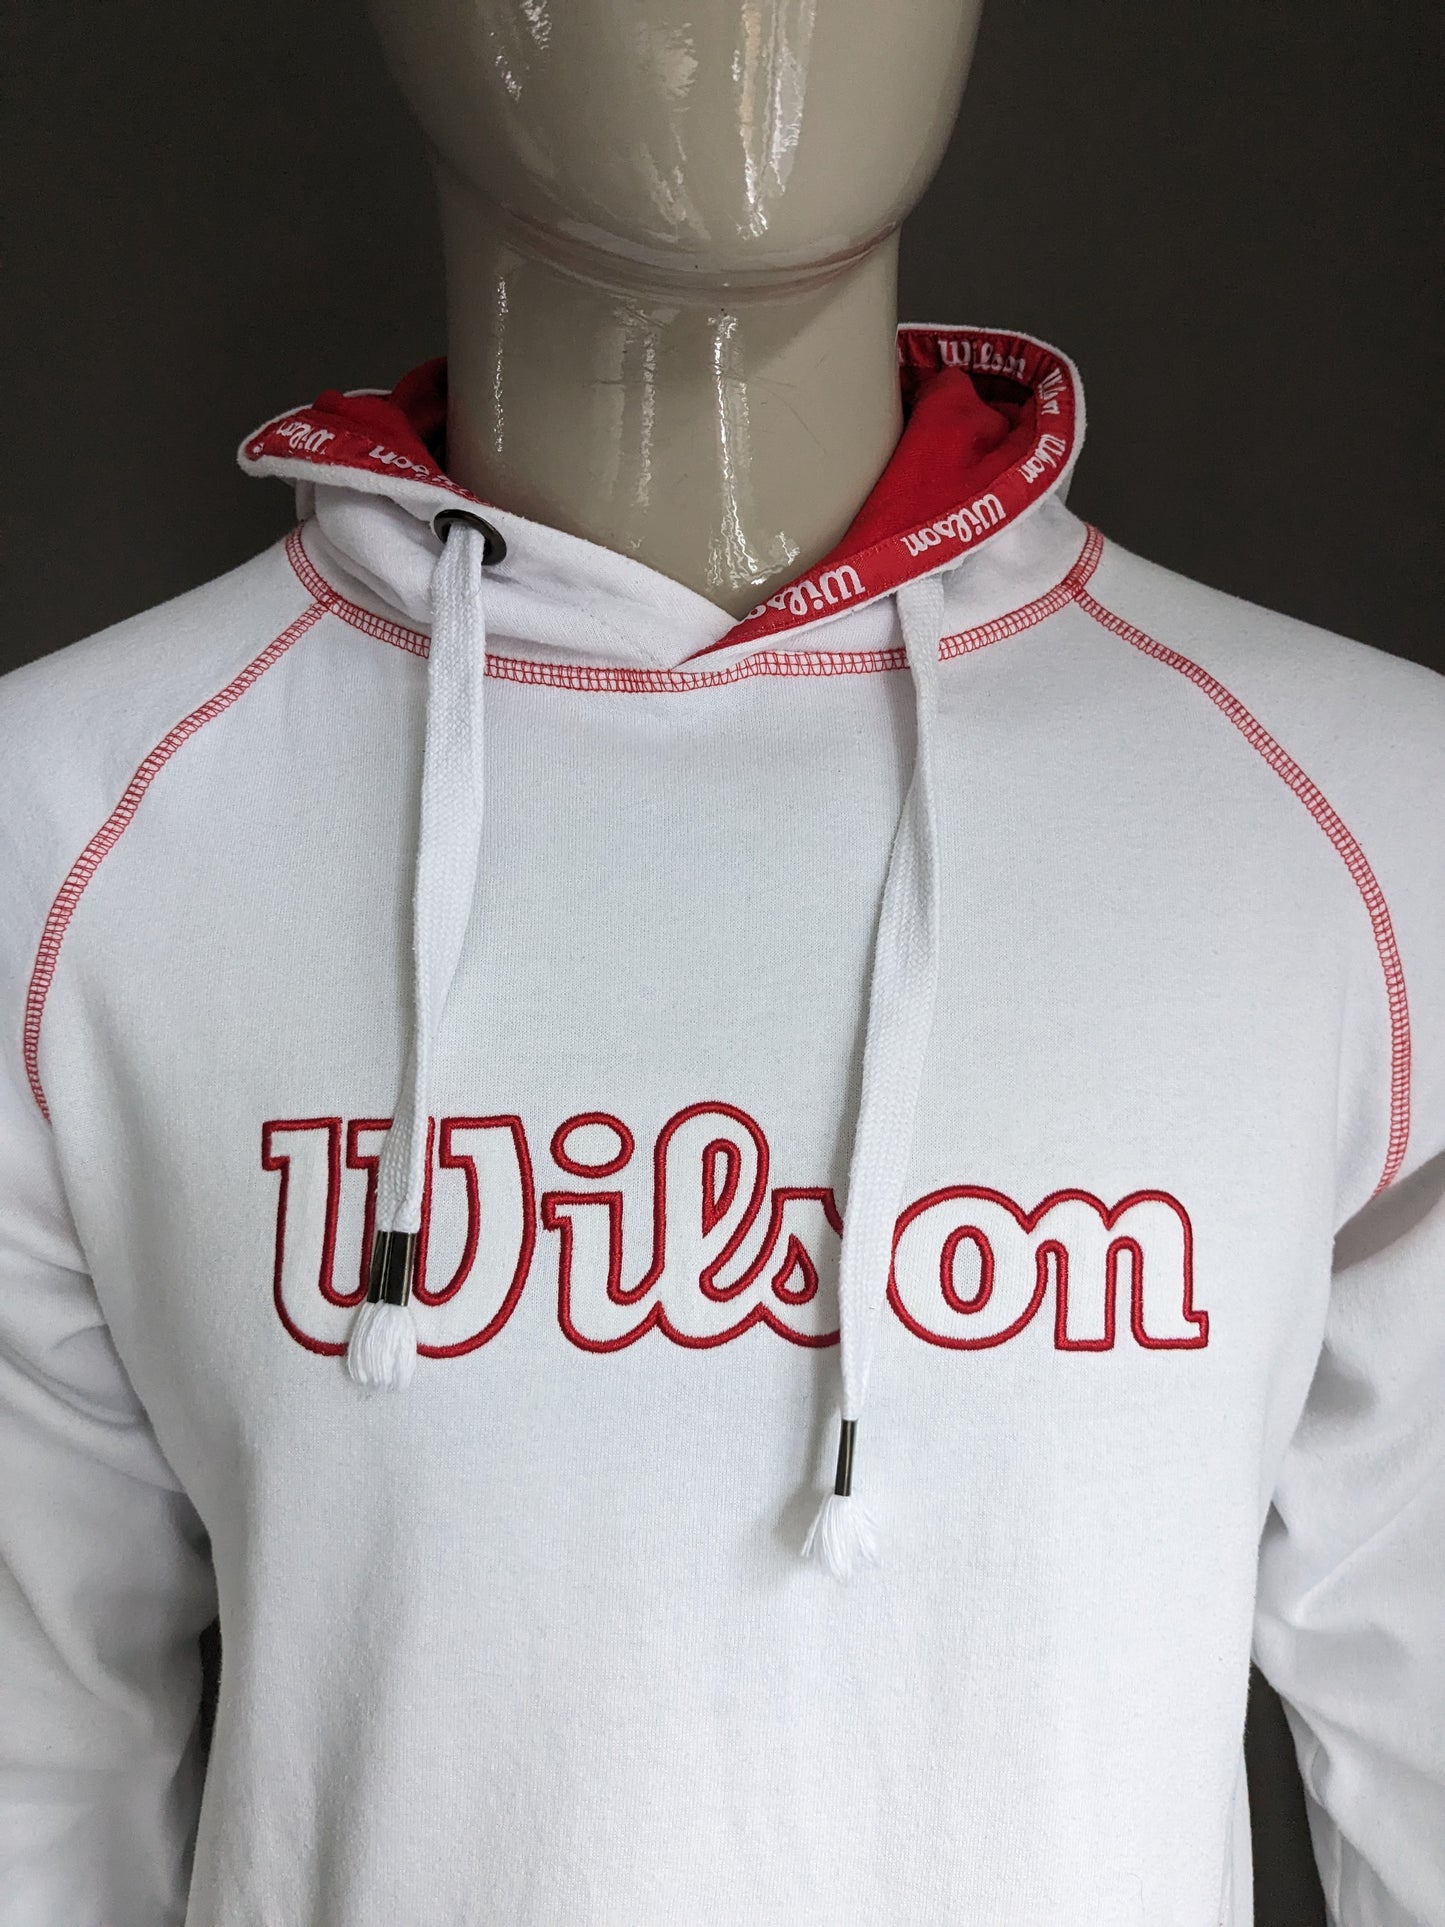 Wilson Hoodie. White Red colored. Size M.